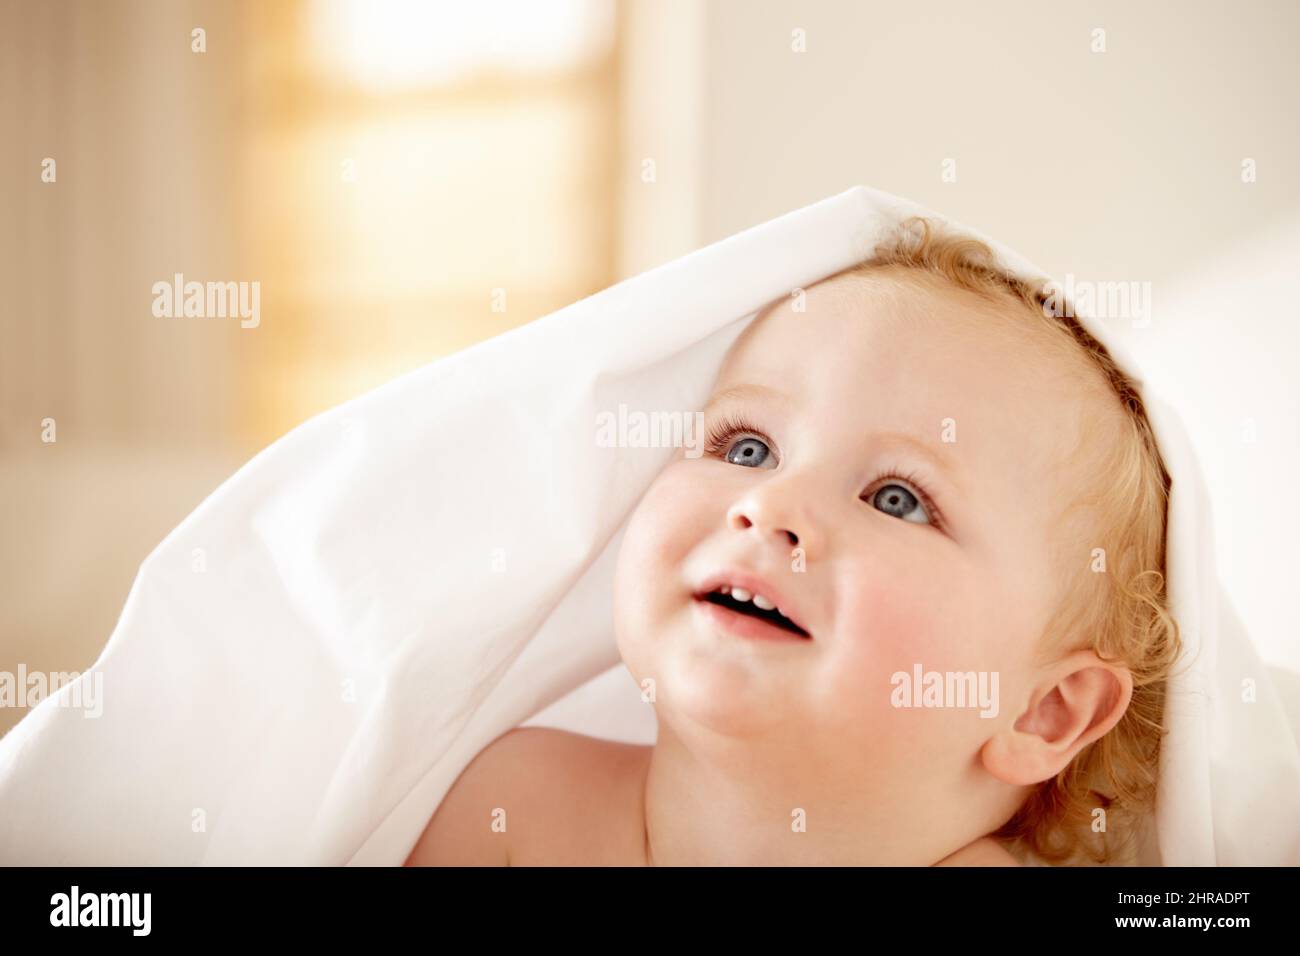 Filled with wonder - Childhood curiousity. Fascinated baby boy looking up at something. Stock Photo